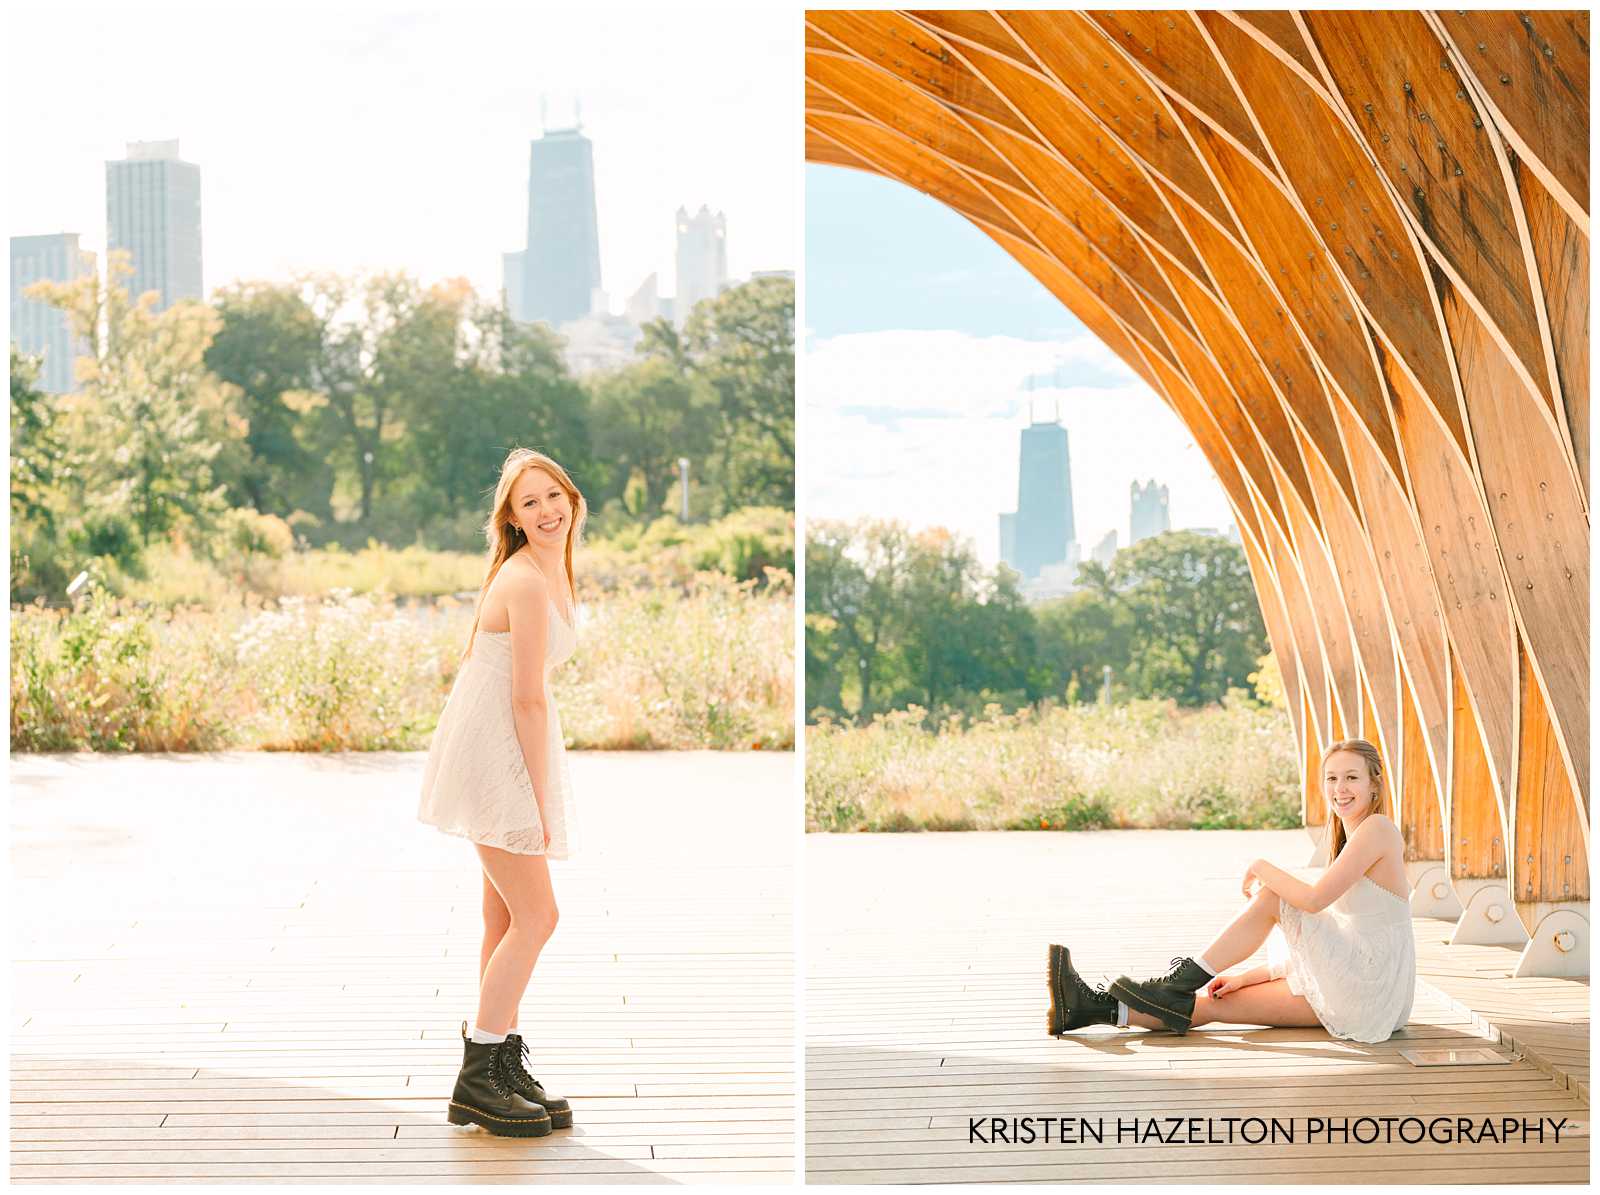 Lincoln Park zoo senior photos at the Honeycomb or People's Gas Education Pavilion